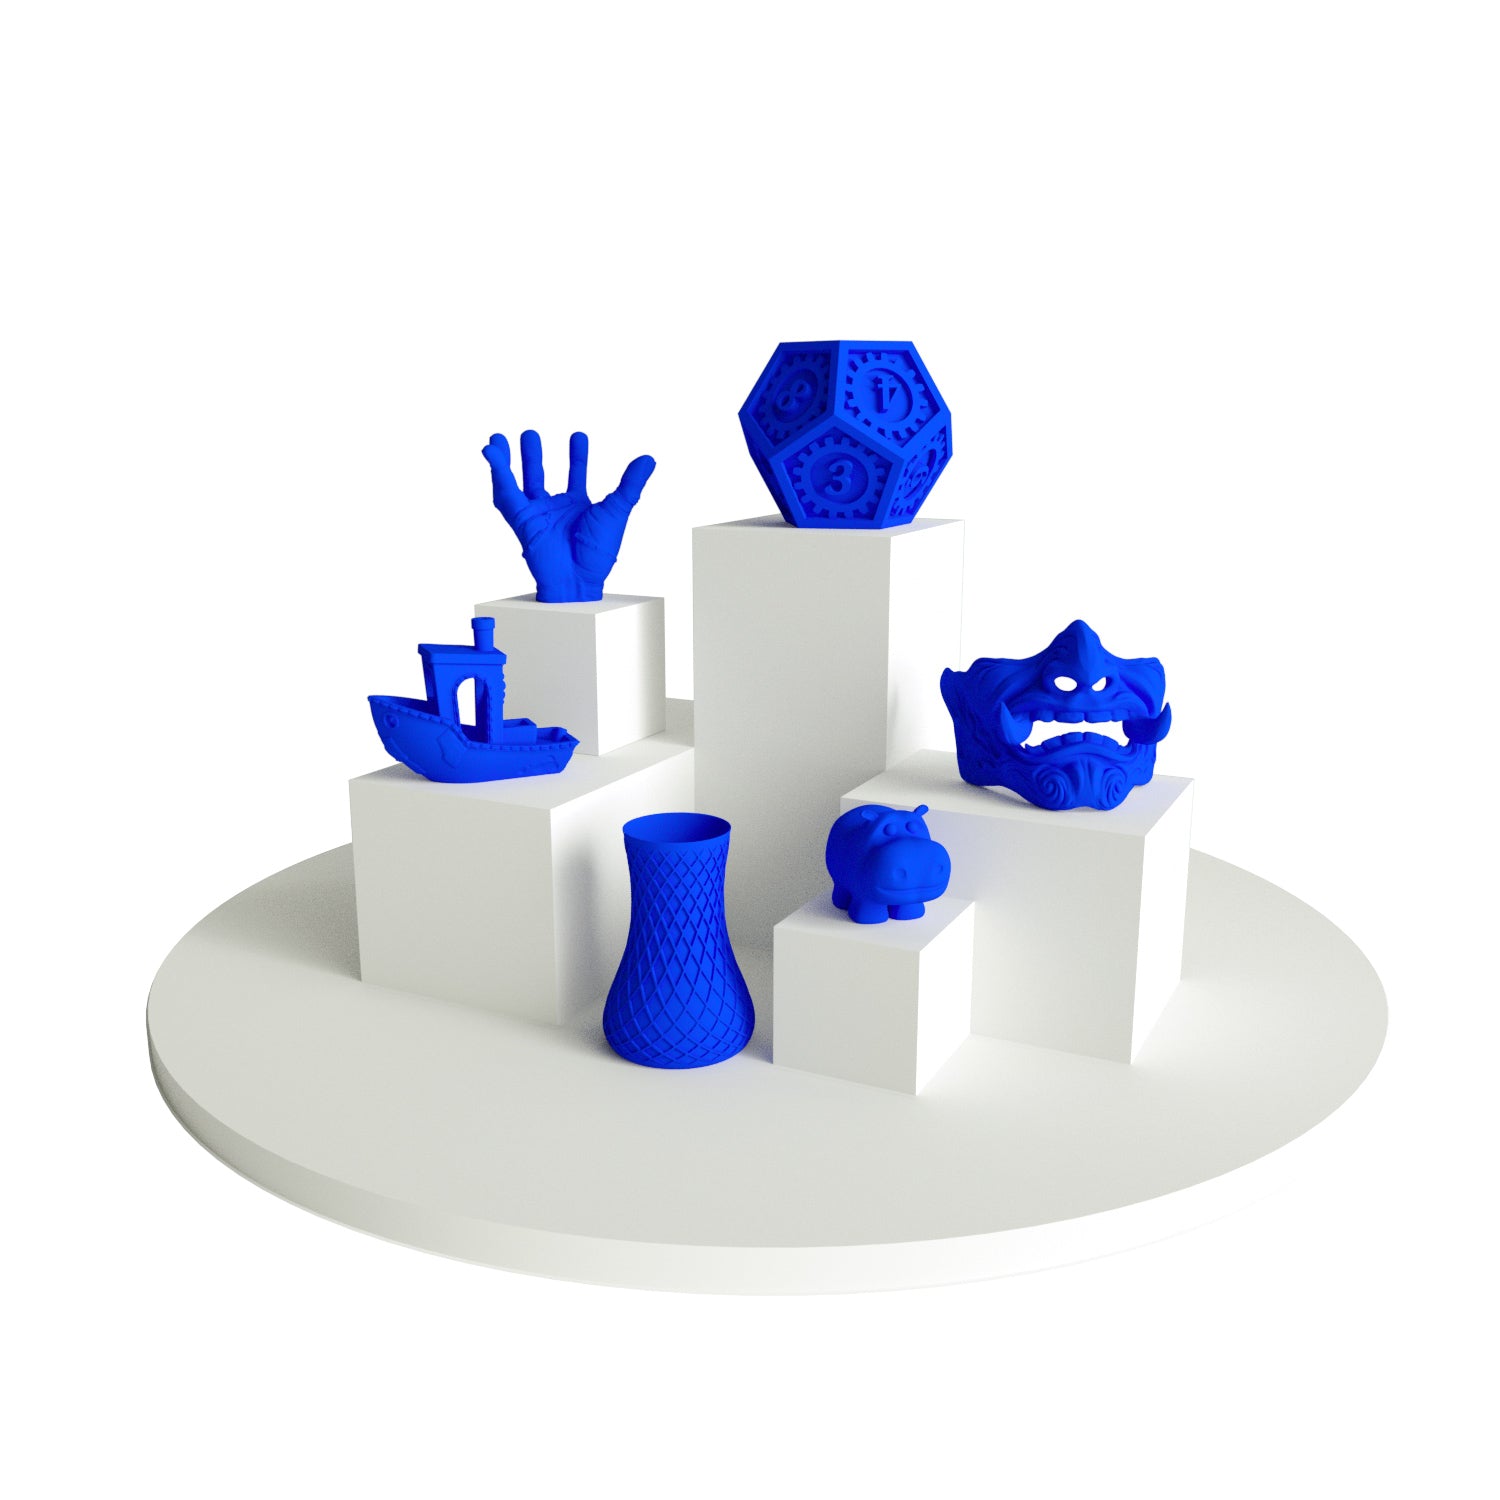 Gallery of 3D printed models with blue PLA Matte 